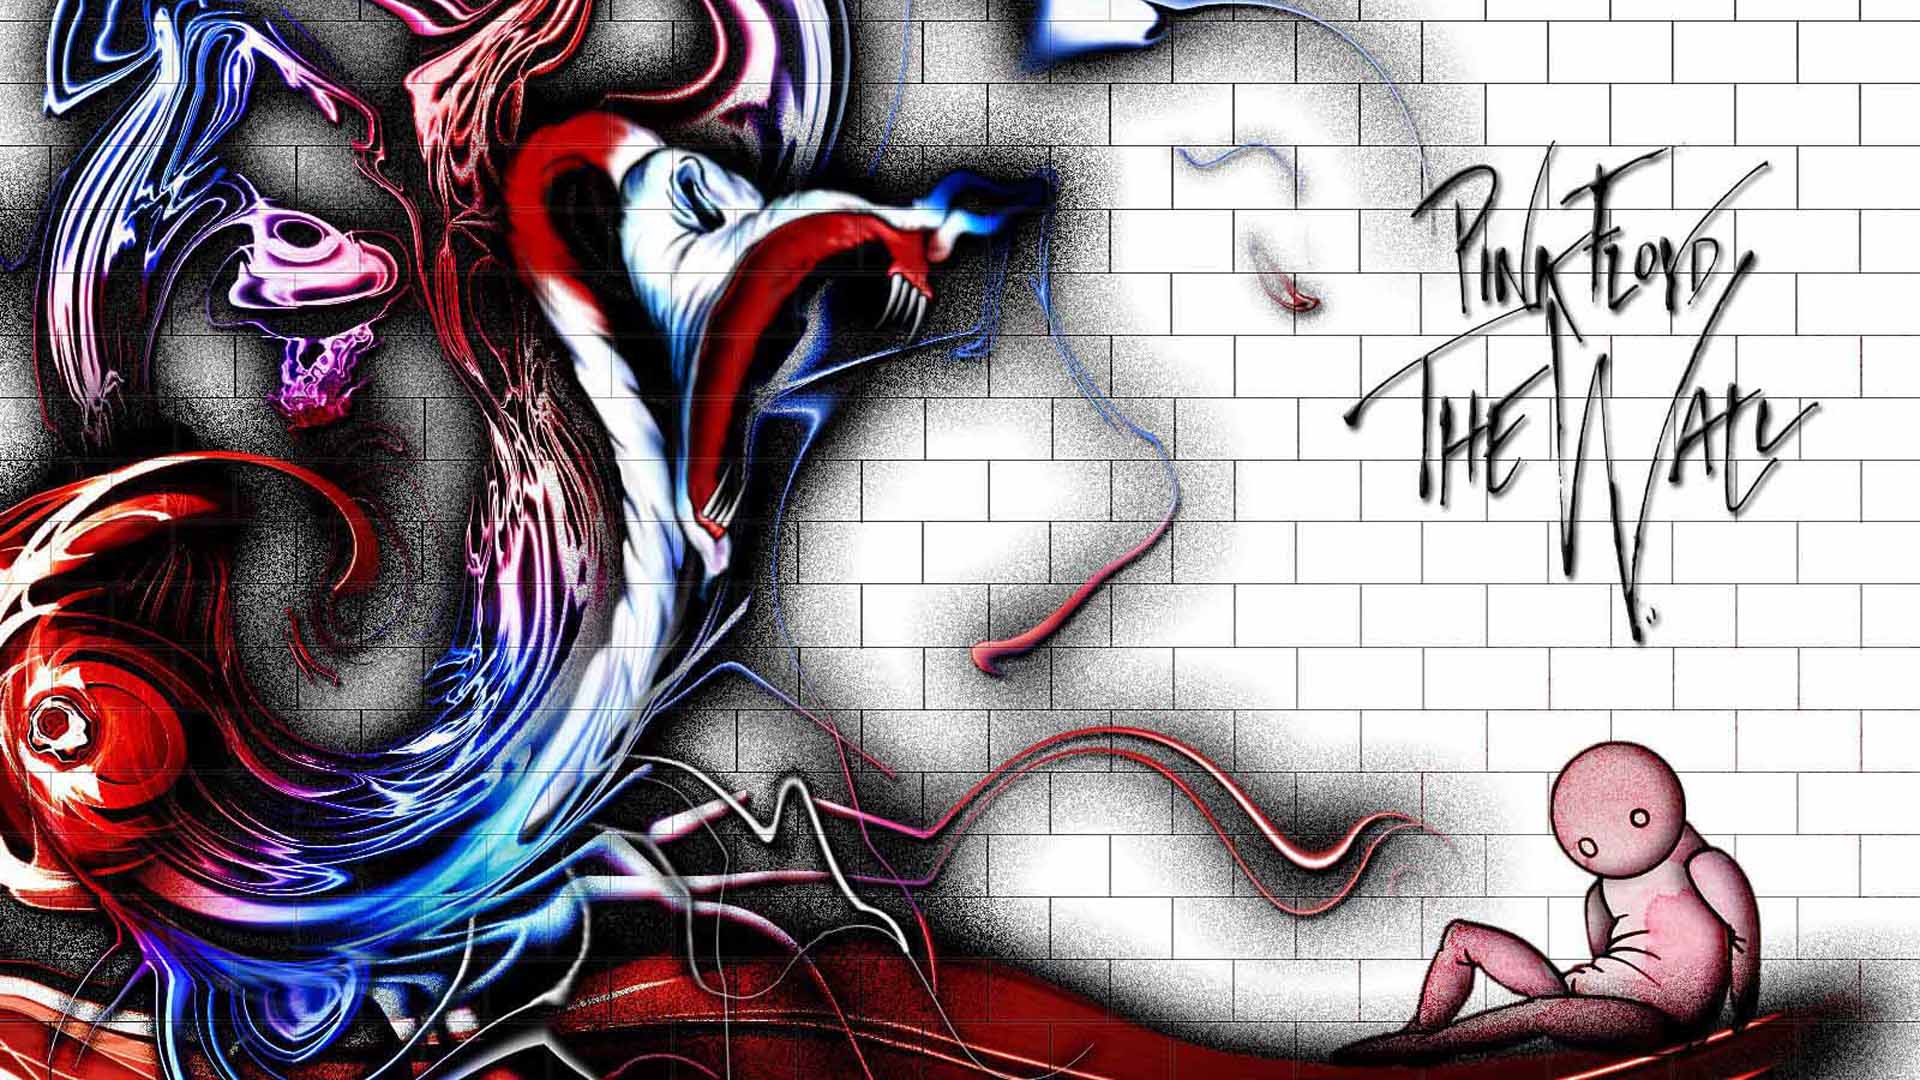 Wallpaper For > Pink Floyd The Wall Hammers Wallpaper